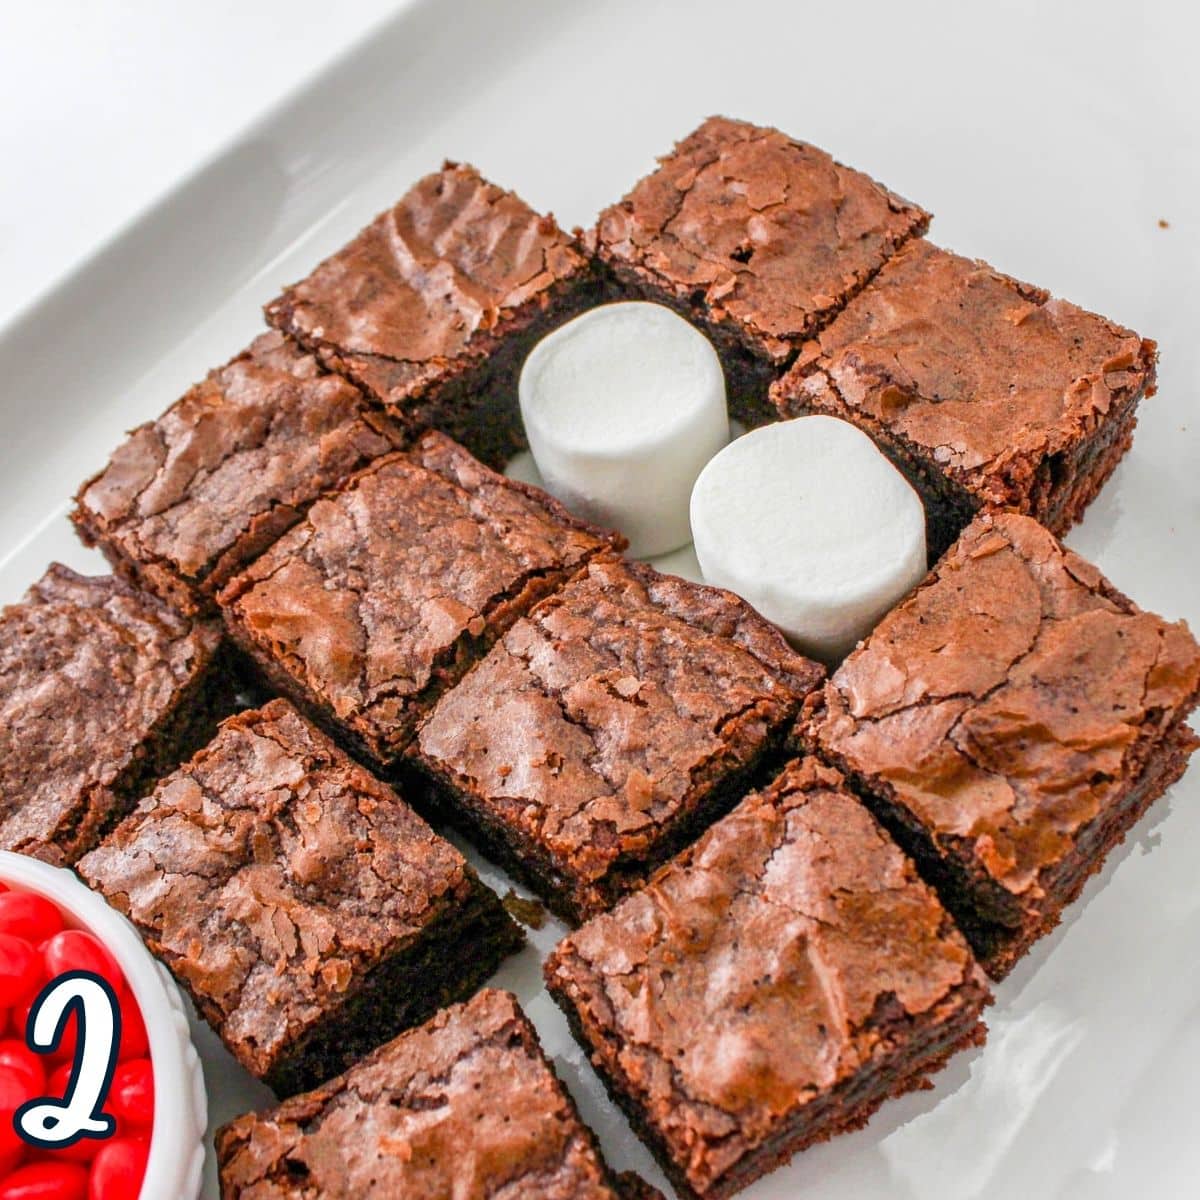 A plate with brownies and marshmallows on it.